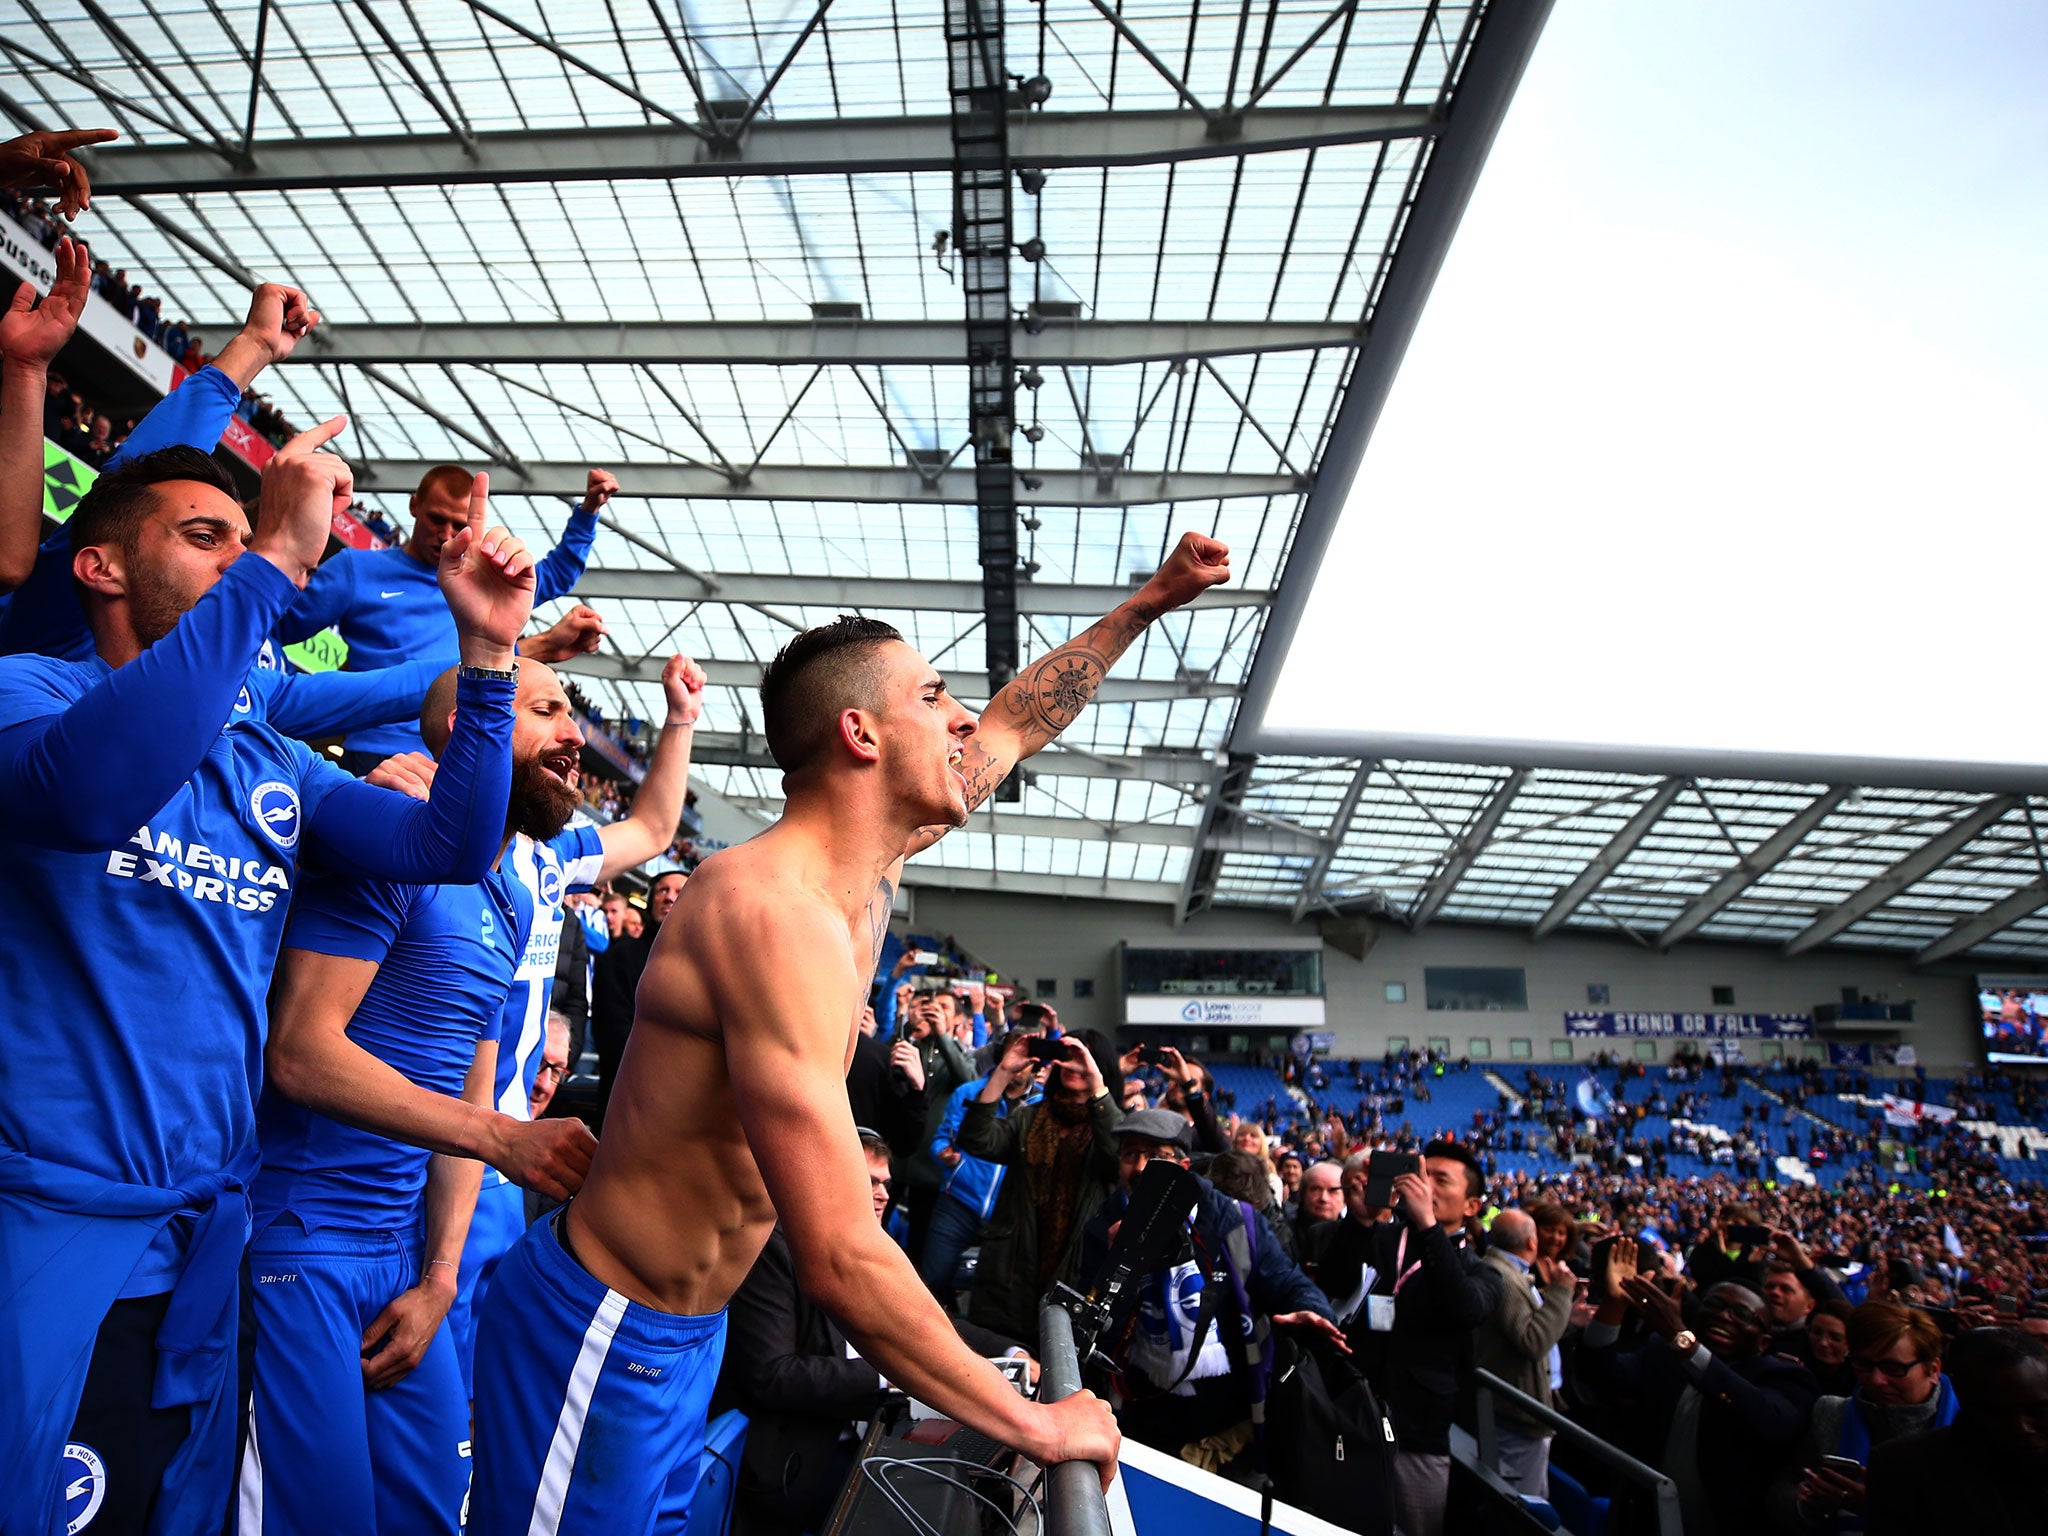 Brighton have had to tailor their game this season after clinching promotion last year